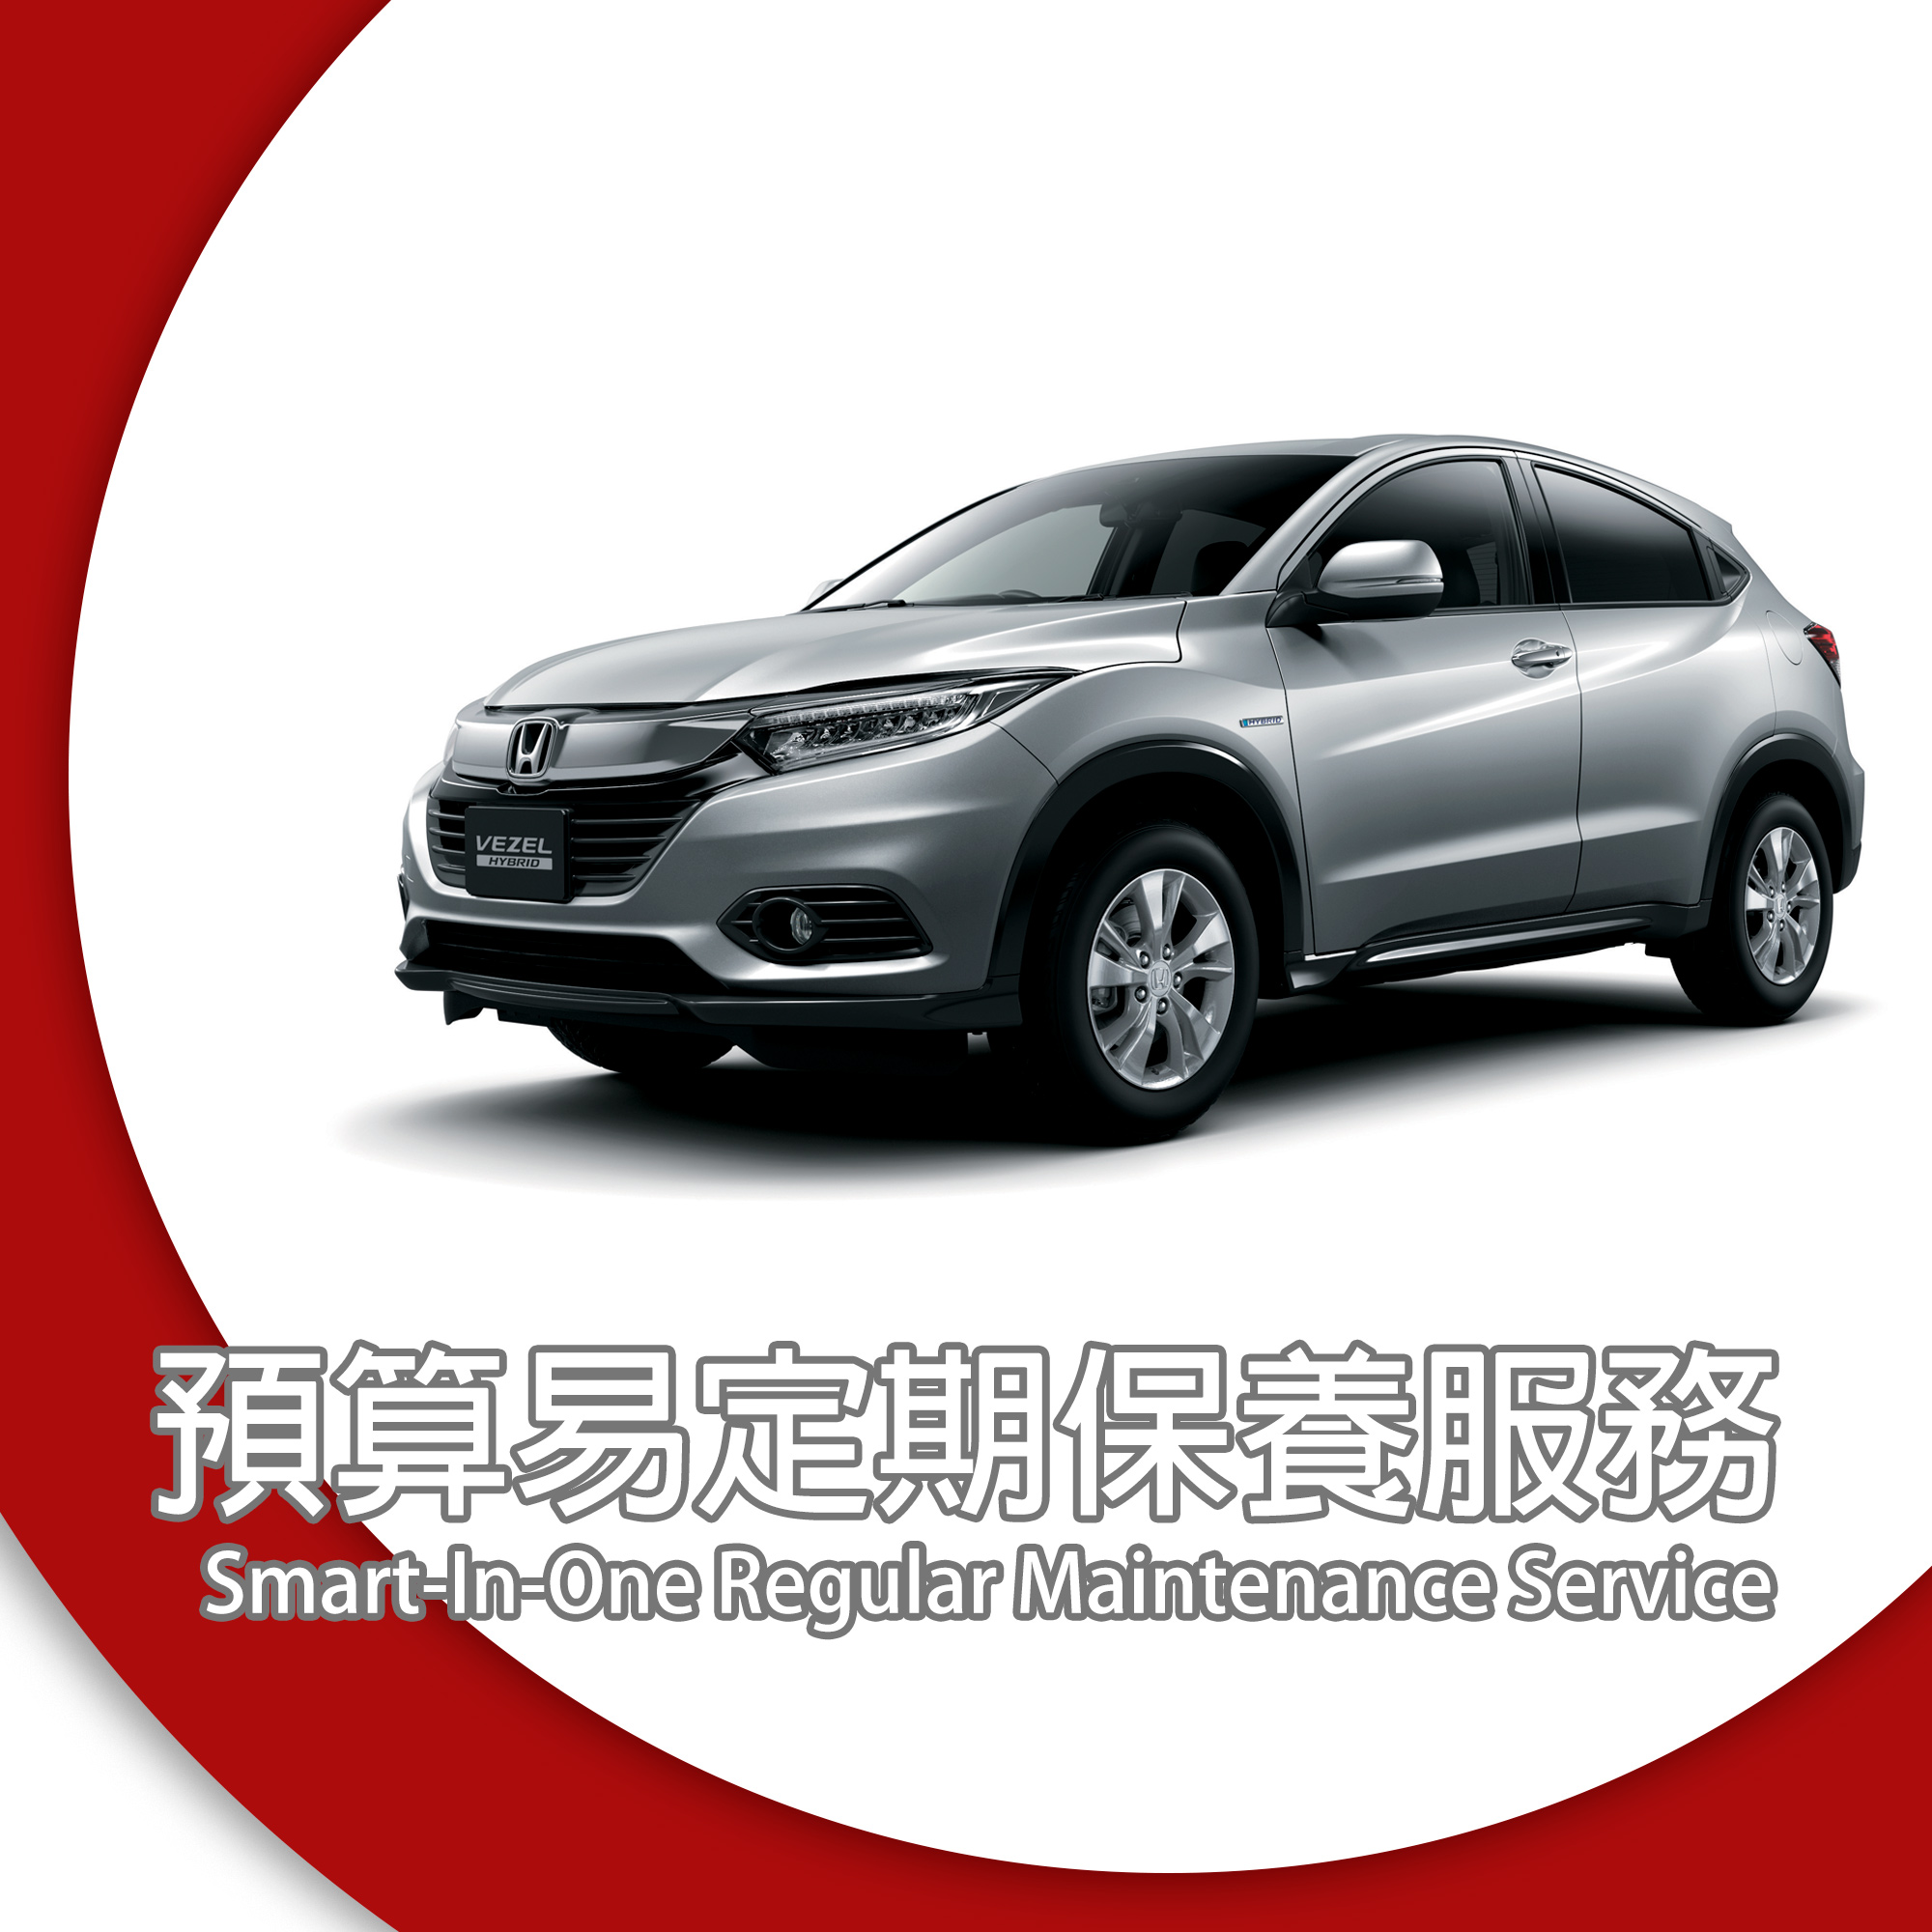 Stream / Jade /Civic 1.8 /HR-V / Vezel - Stand Maintenance Package Coupons 2 Set Early Bird Discount (Vehicle Age 37-72 Months)